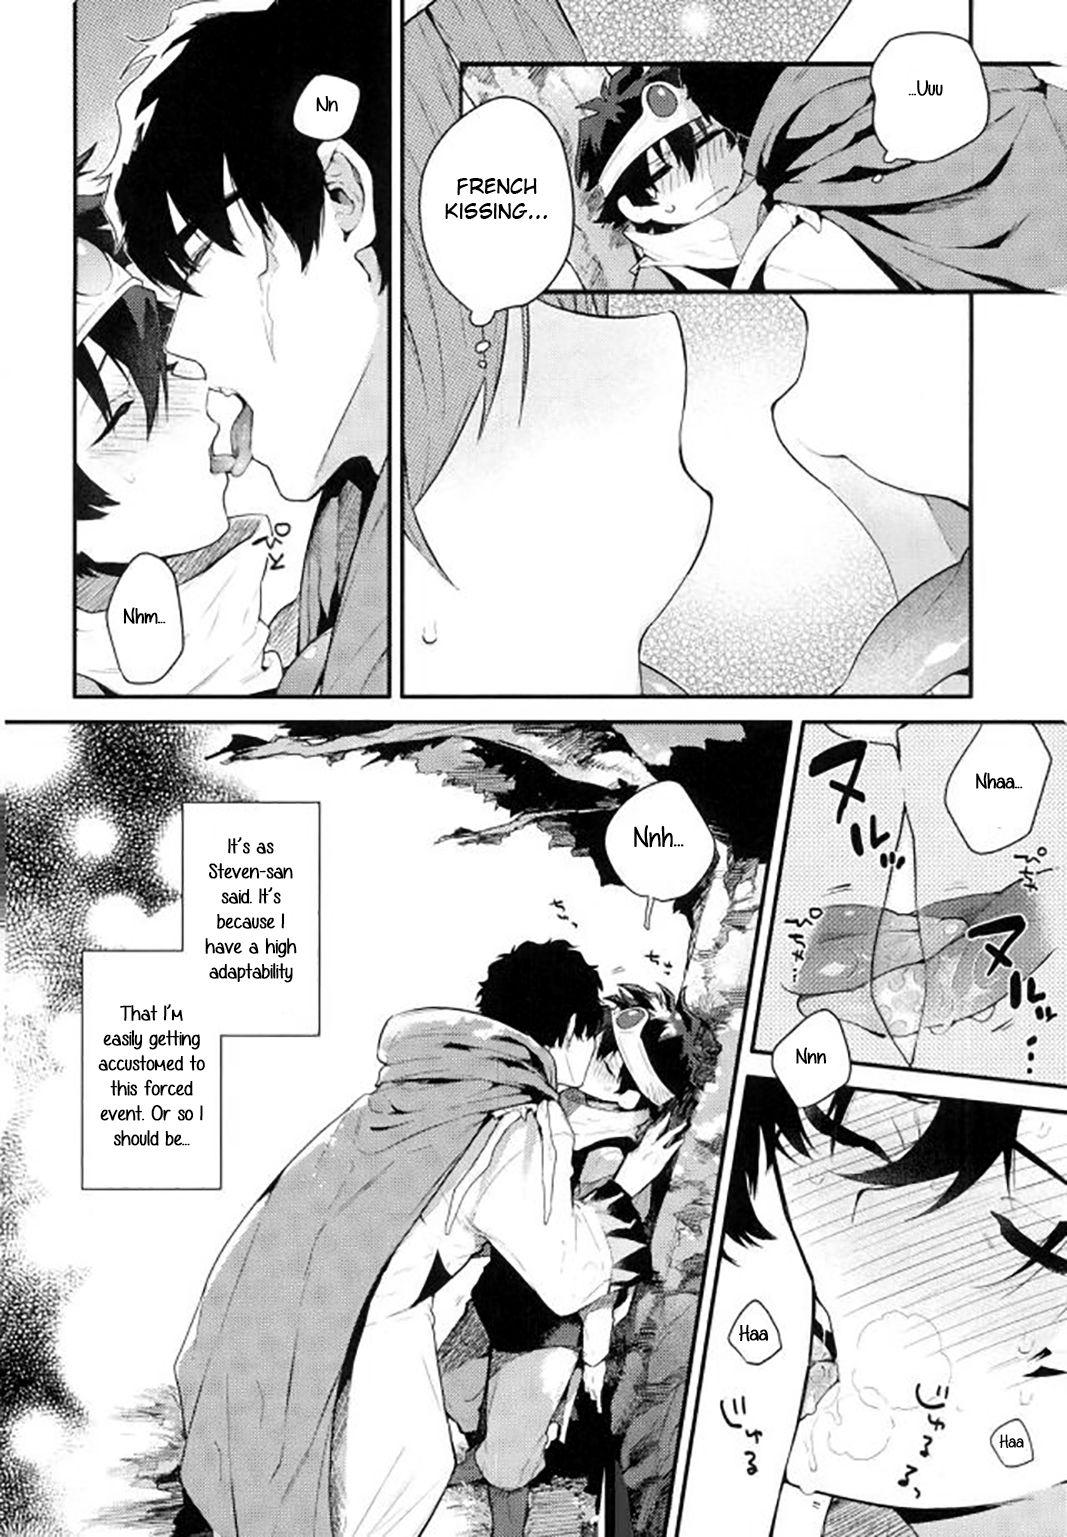 Bizarre After Being Sent to Another World I'm Forced to a Love Event With My Boss!? - Kekkai sensen Pornstar - Page 7